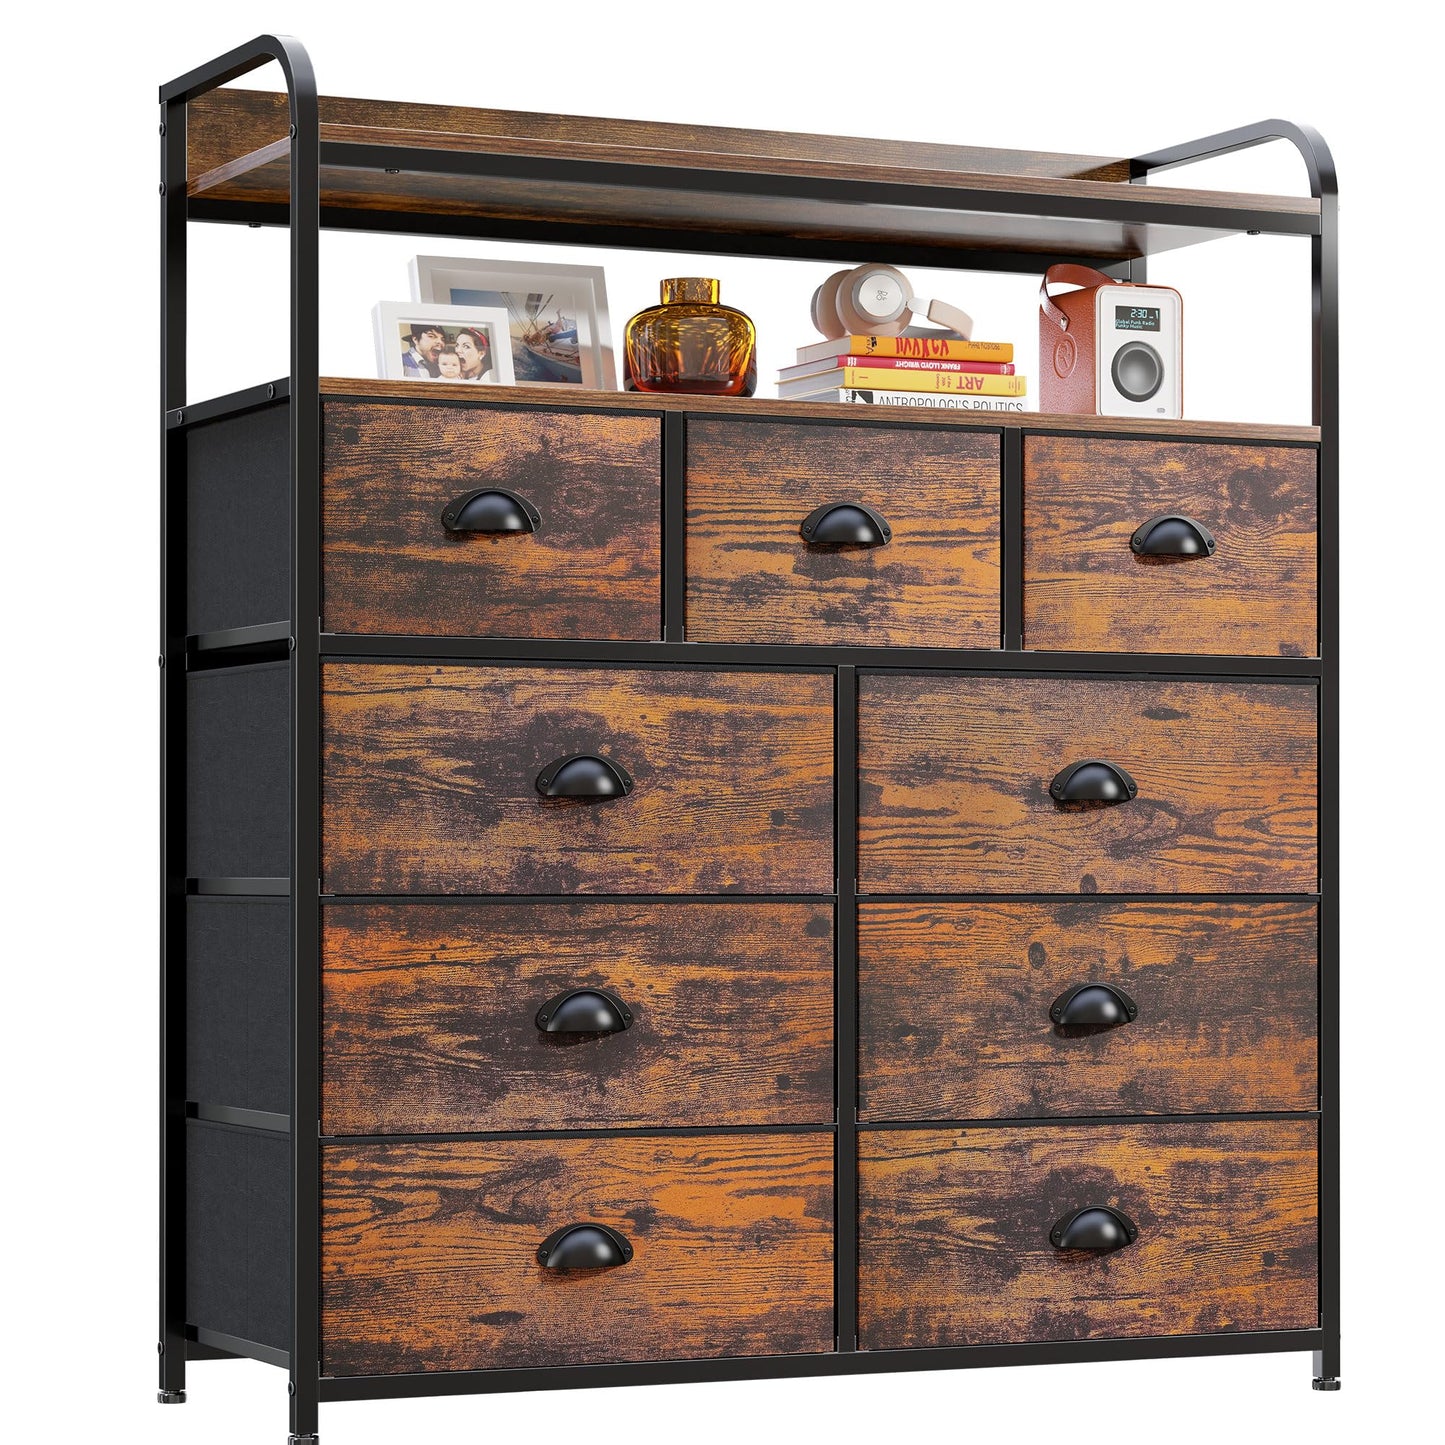 Hana Exports Dresser, Tall Dressers for Bedroom with 9 Drawers, Dressers & Chests of Drawers for Bedroom with 2 Open Shelves and Metal Frame, Large Tall Bedroom Dresser for Bedroom, Closet, Rustic Brown